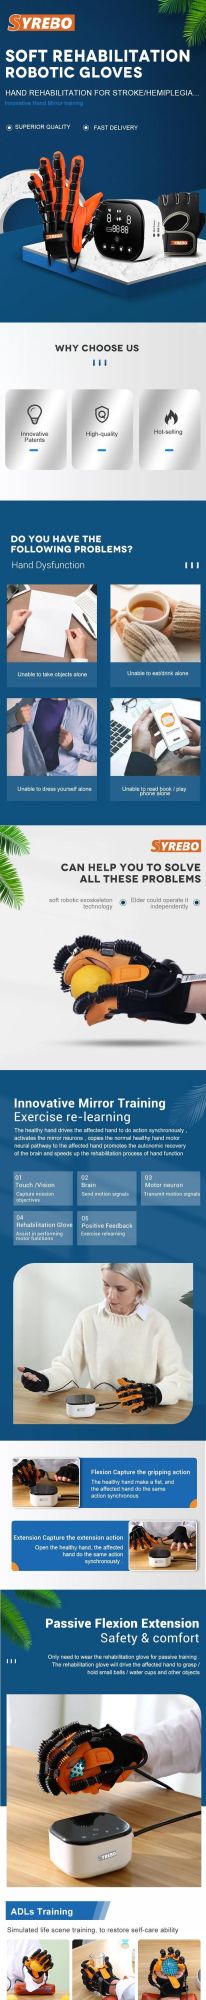 New Design Patent Hand Function Rehabilitation Robot Rehabilitation Therapy System